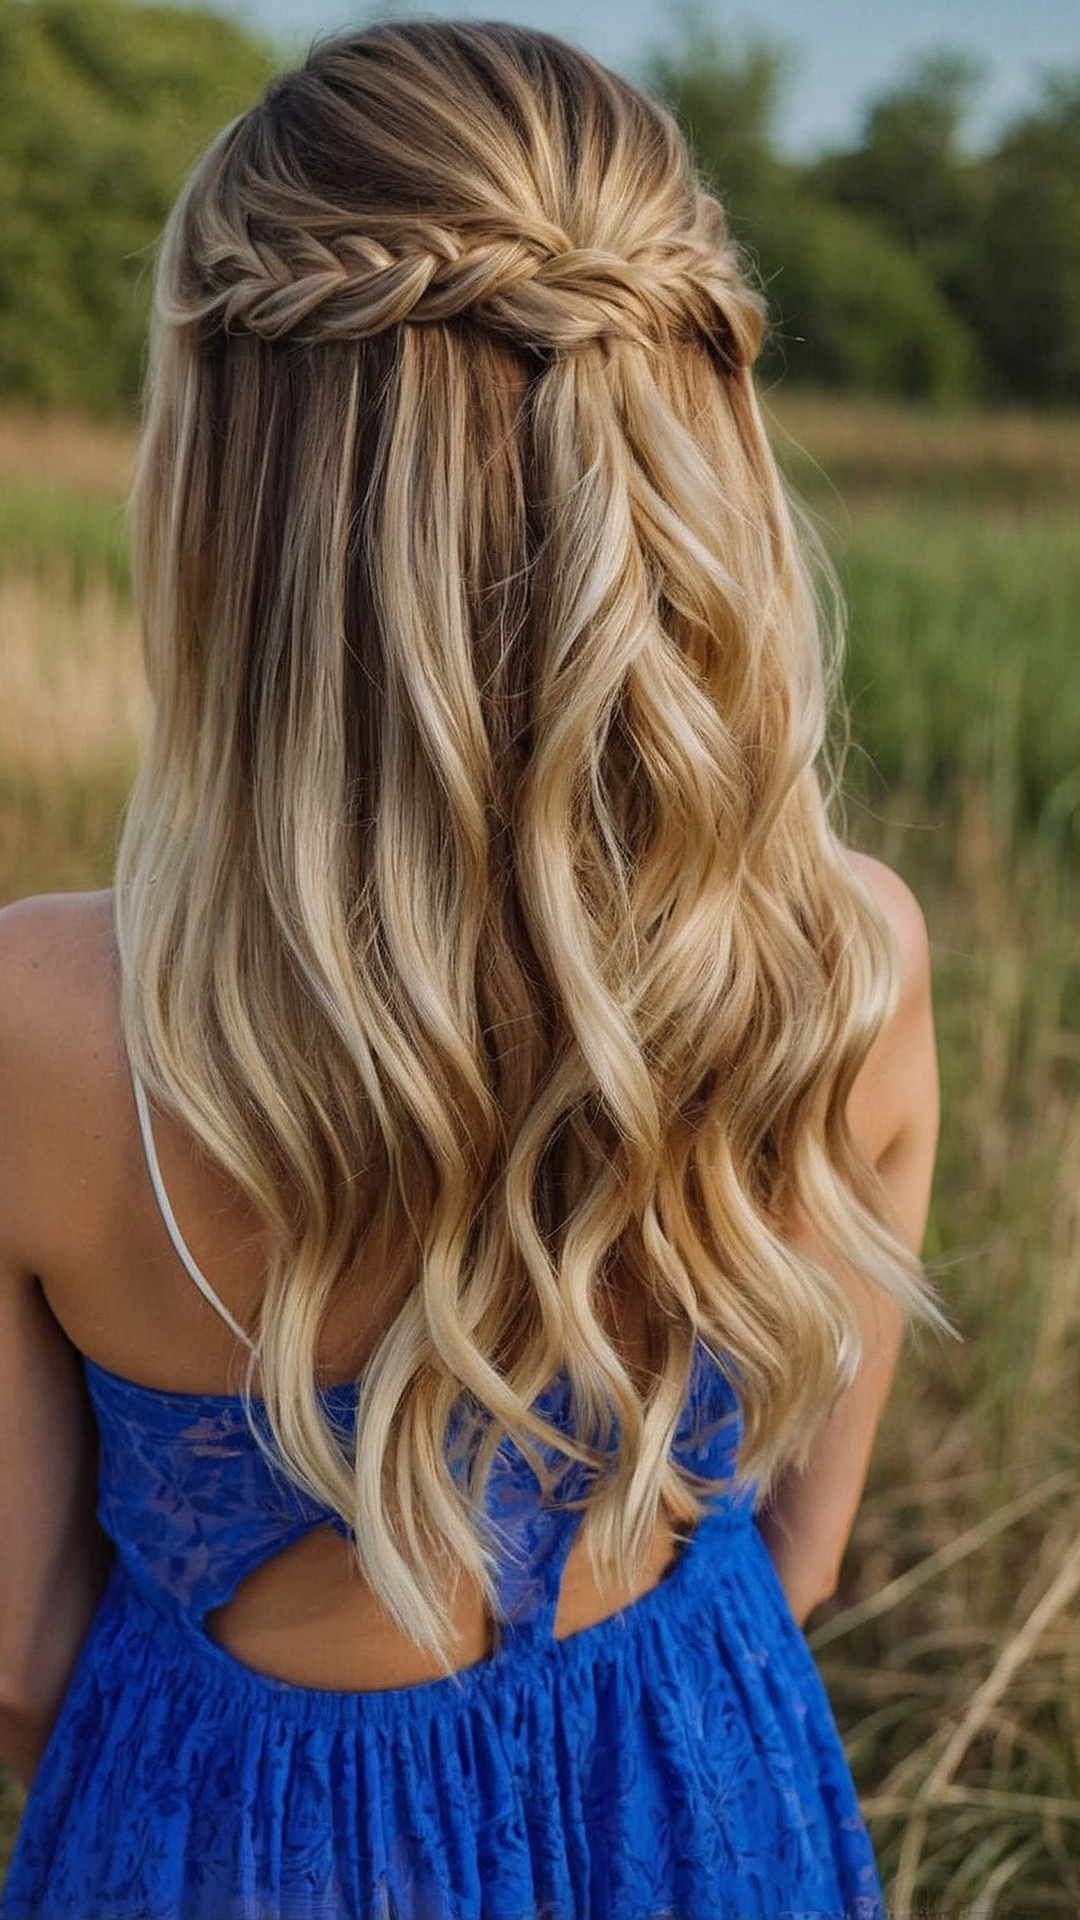 Summer Sizzle: Gorgeous Hairstyle Inspiration for the Season